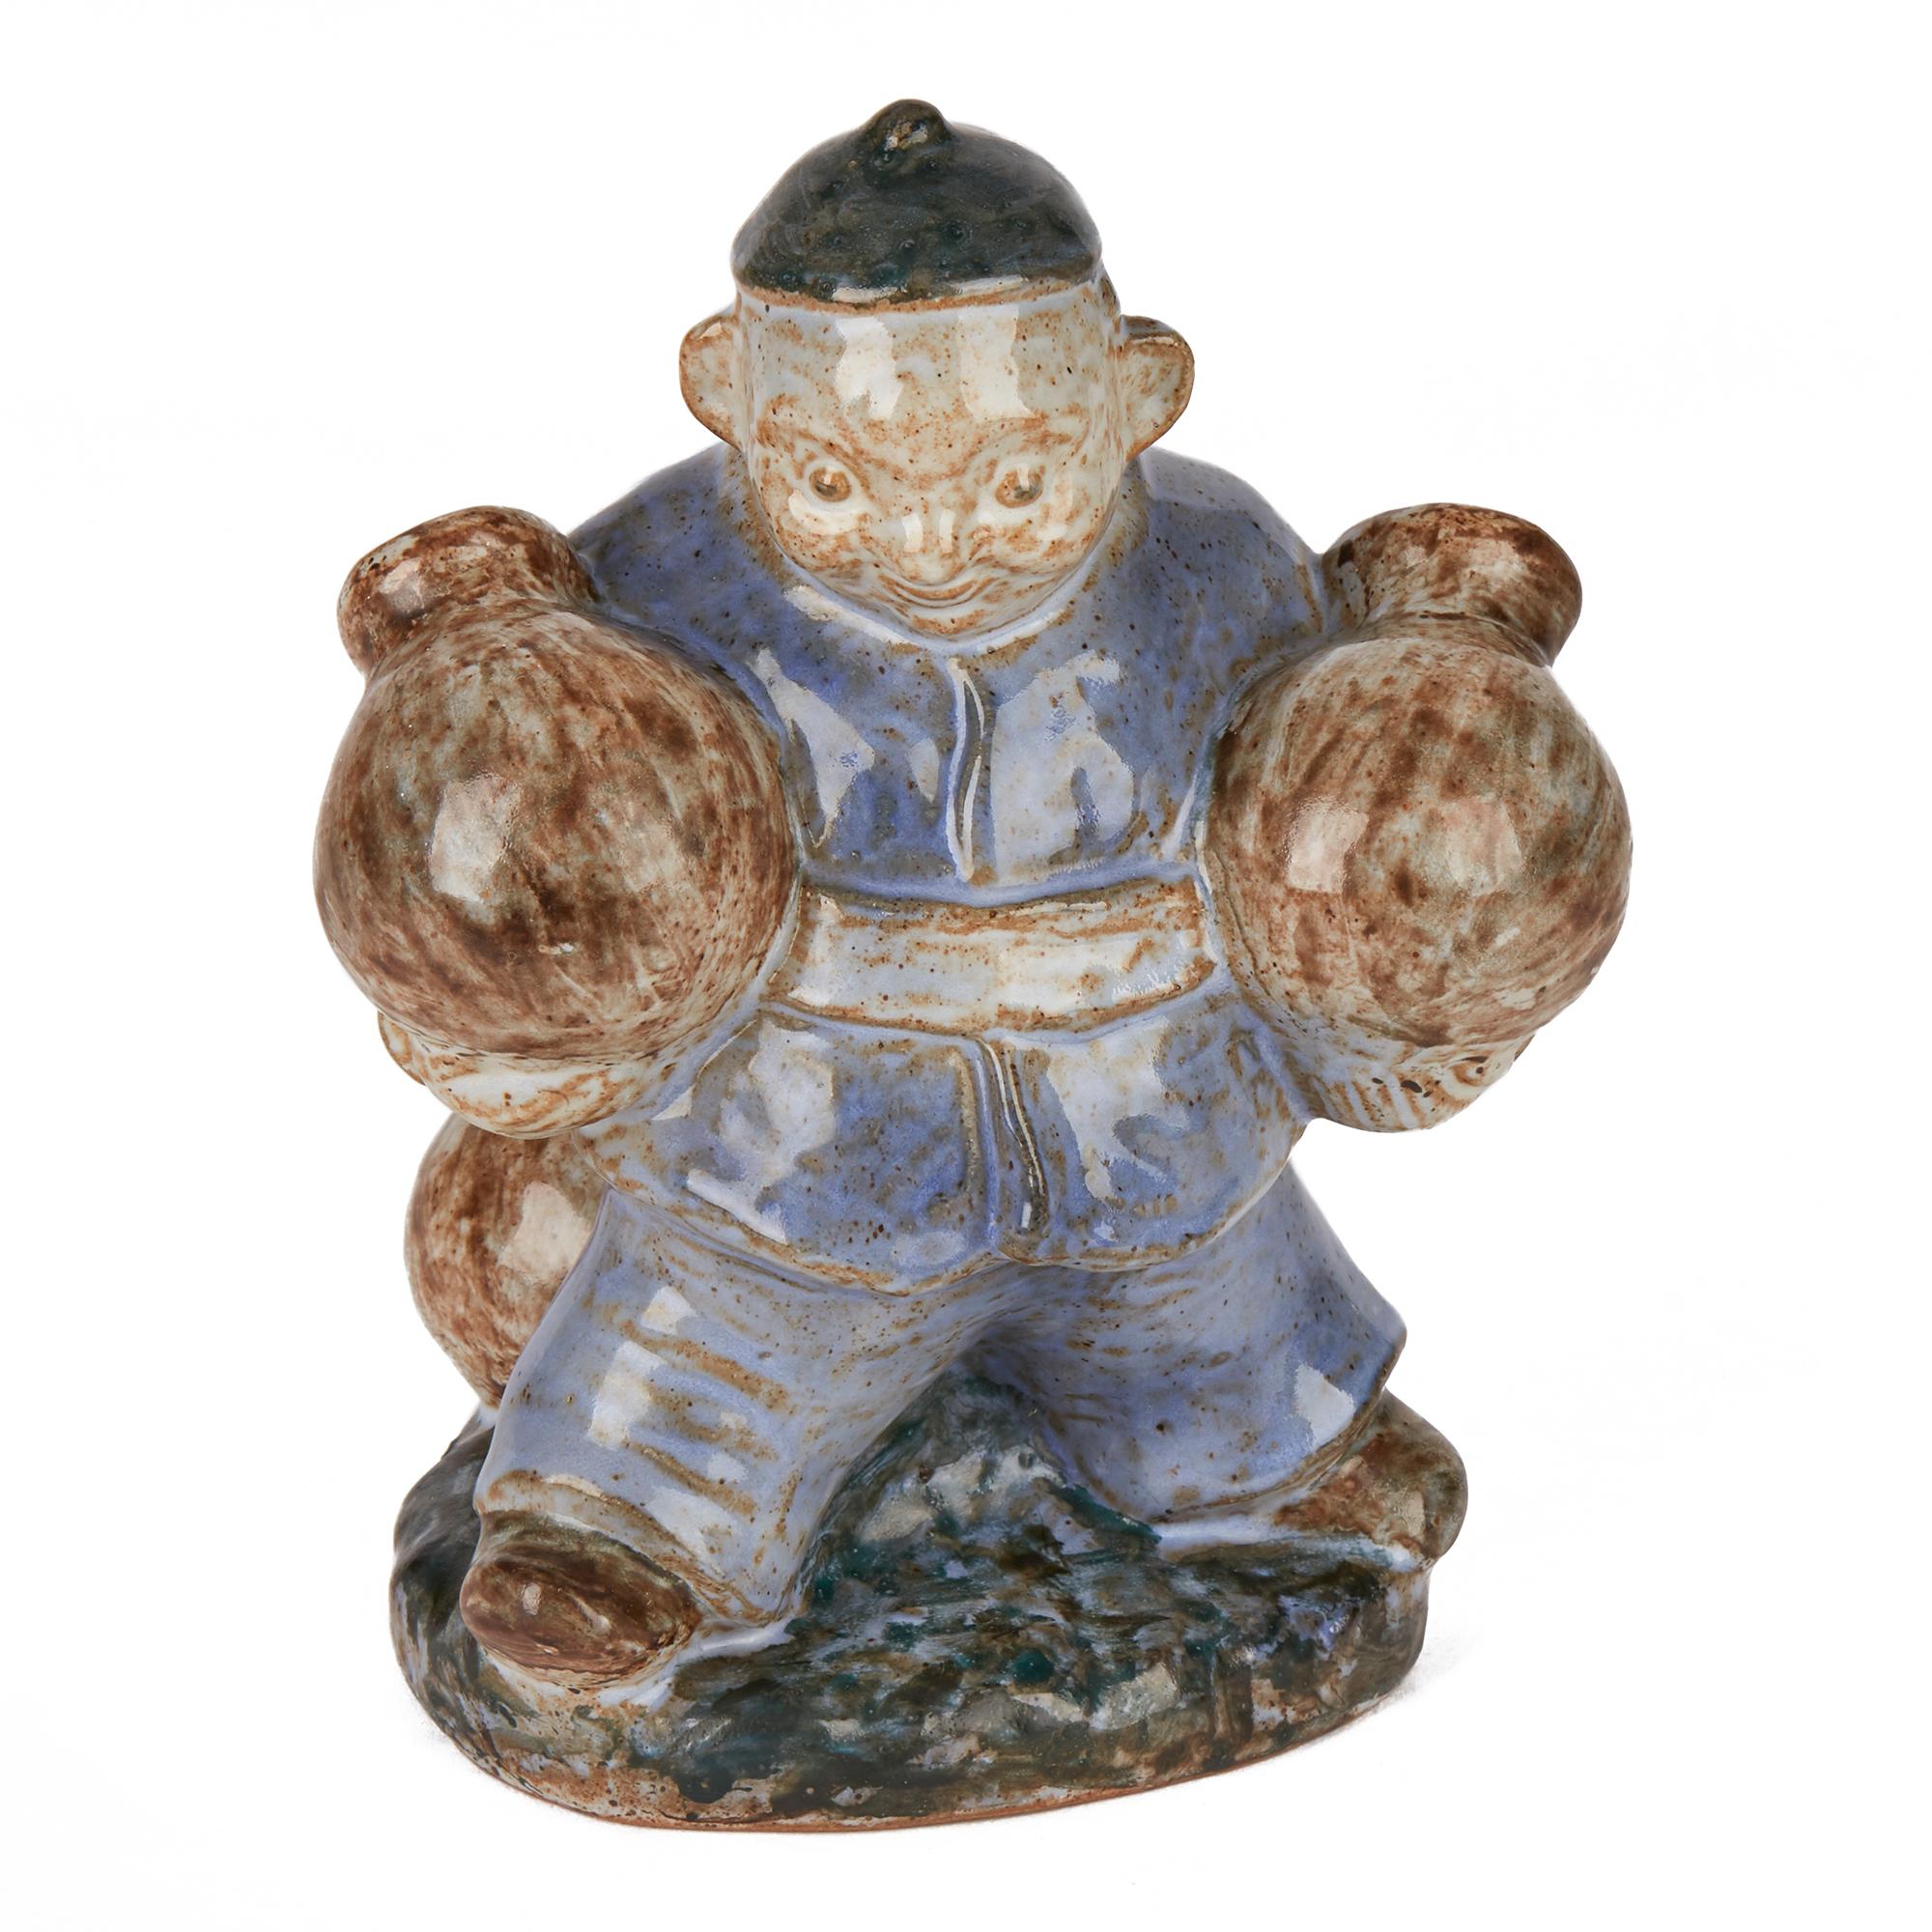 A stylish midcentury Danish stoneware pottery sculpture of an Asian figure carrying two large pottery vessels with further vessels standing on the base by L Hjorth. The large figure is glazed in blue and brown on a grey colored ground and is mounted